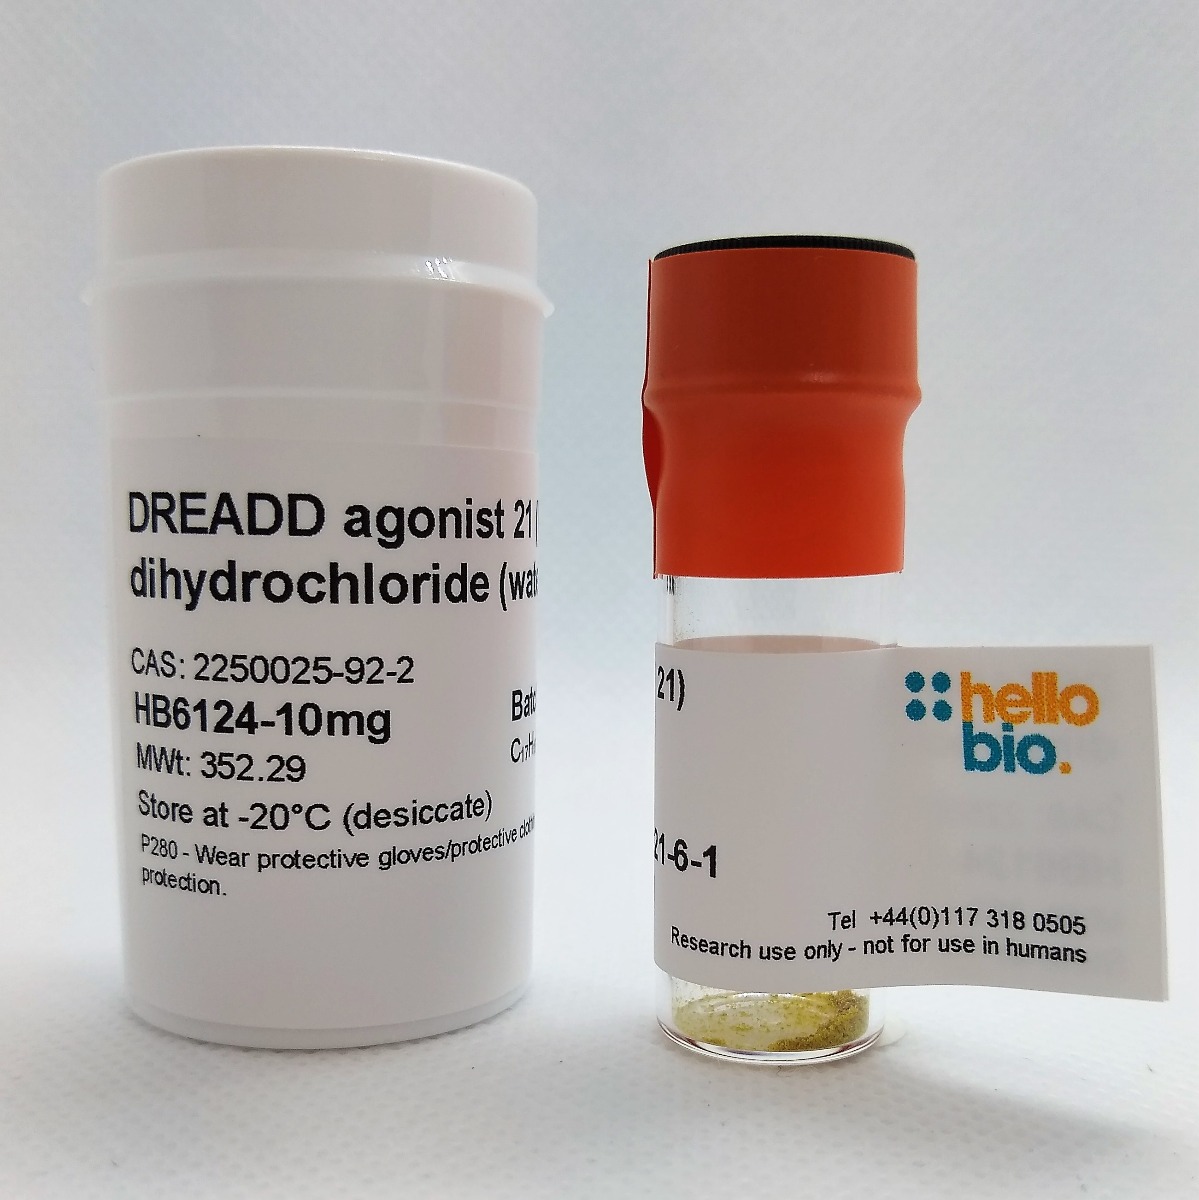 DREADD agonist 21 (Compound 21) dihydrochloride (water soluble) product vial image | Hello Bio